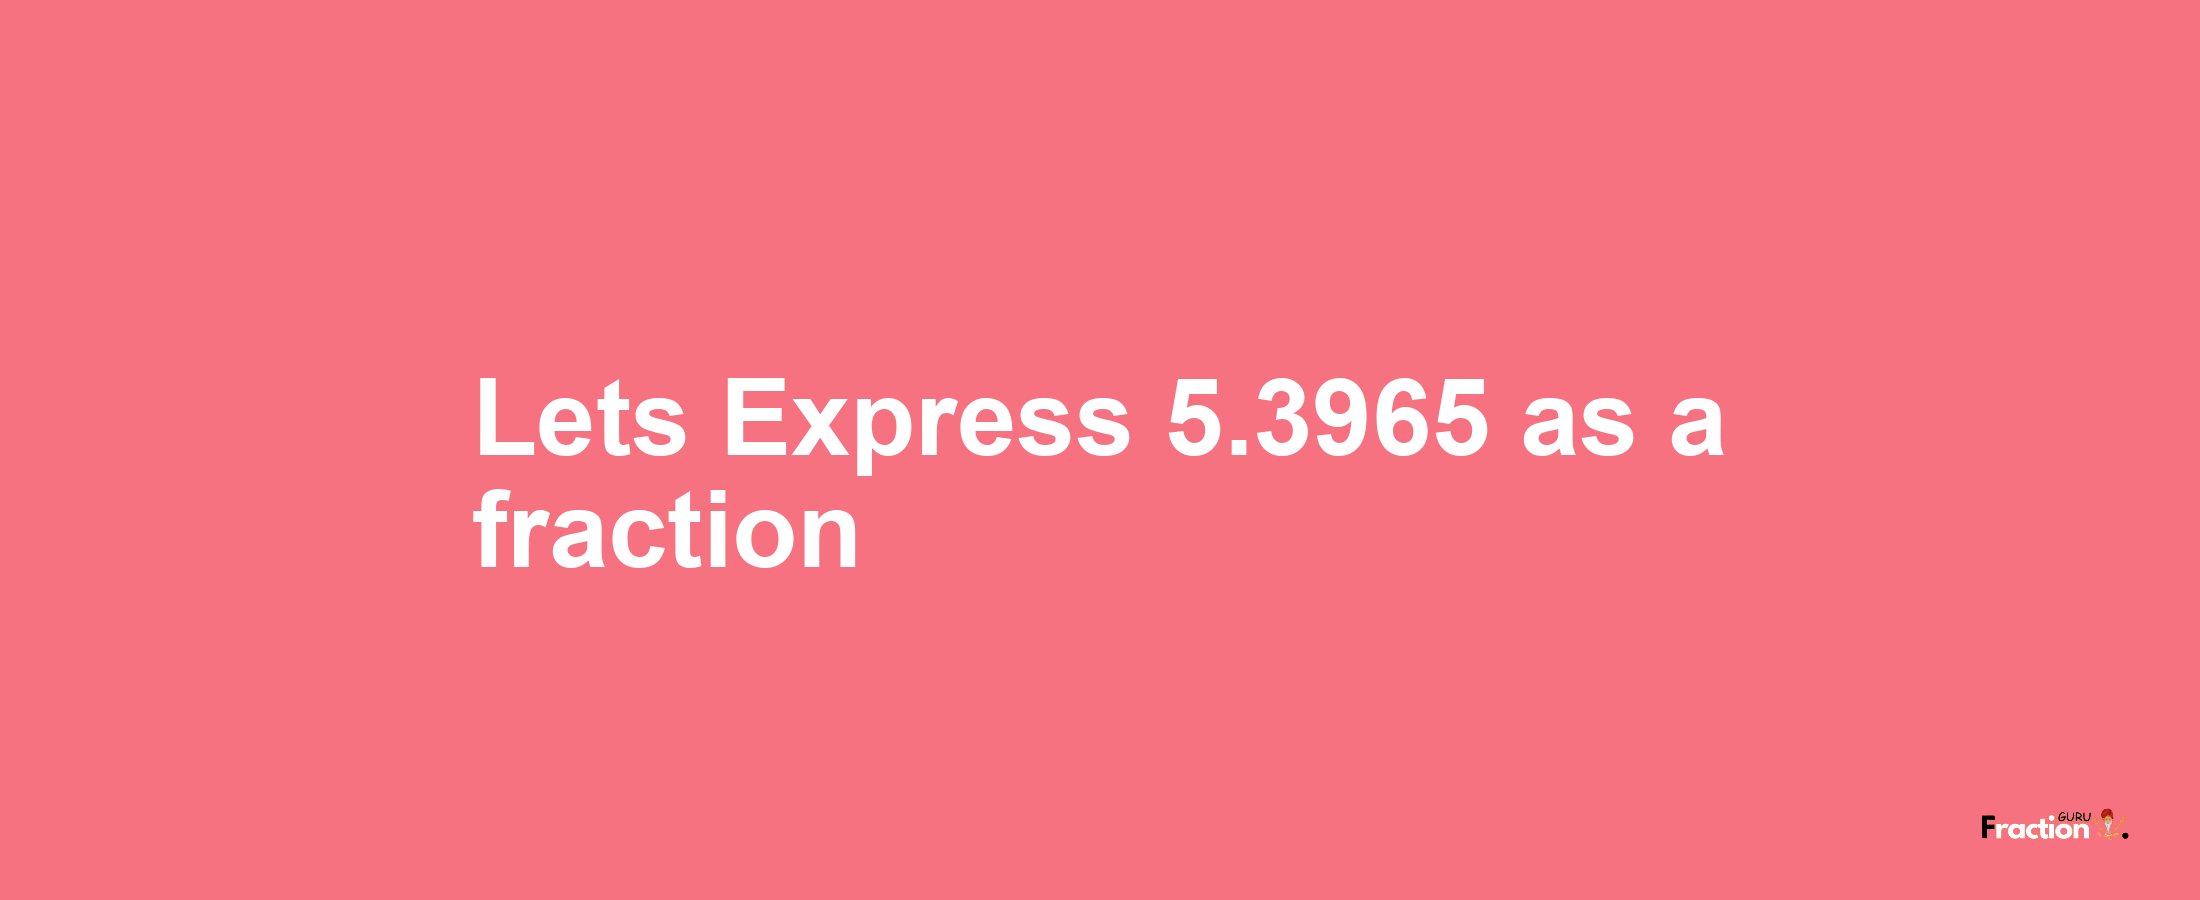 Lets Express 5.3965 as afraction